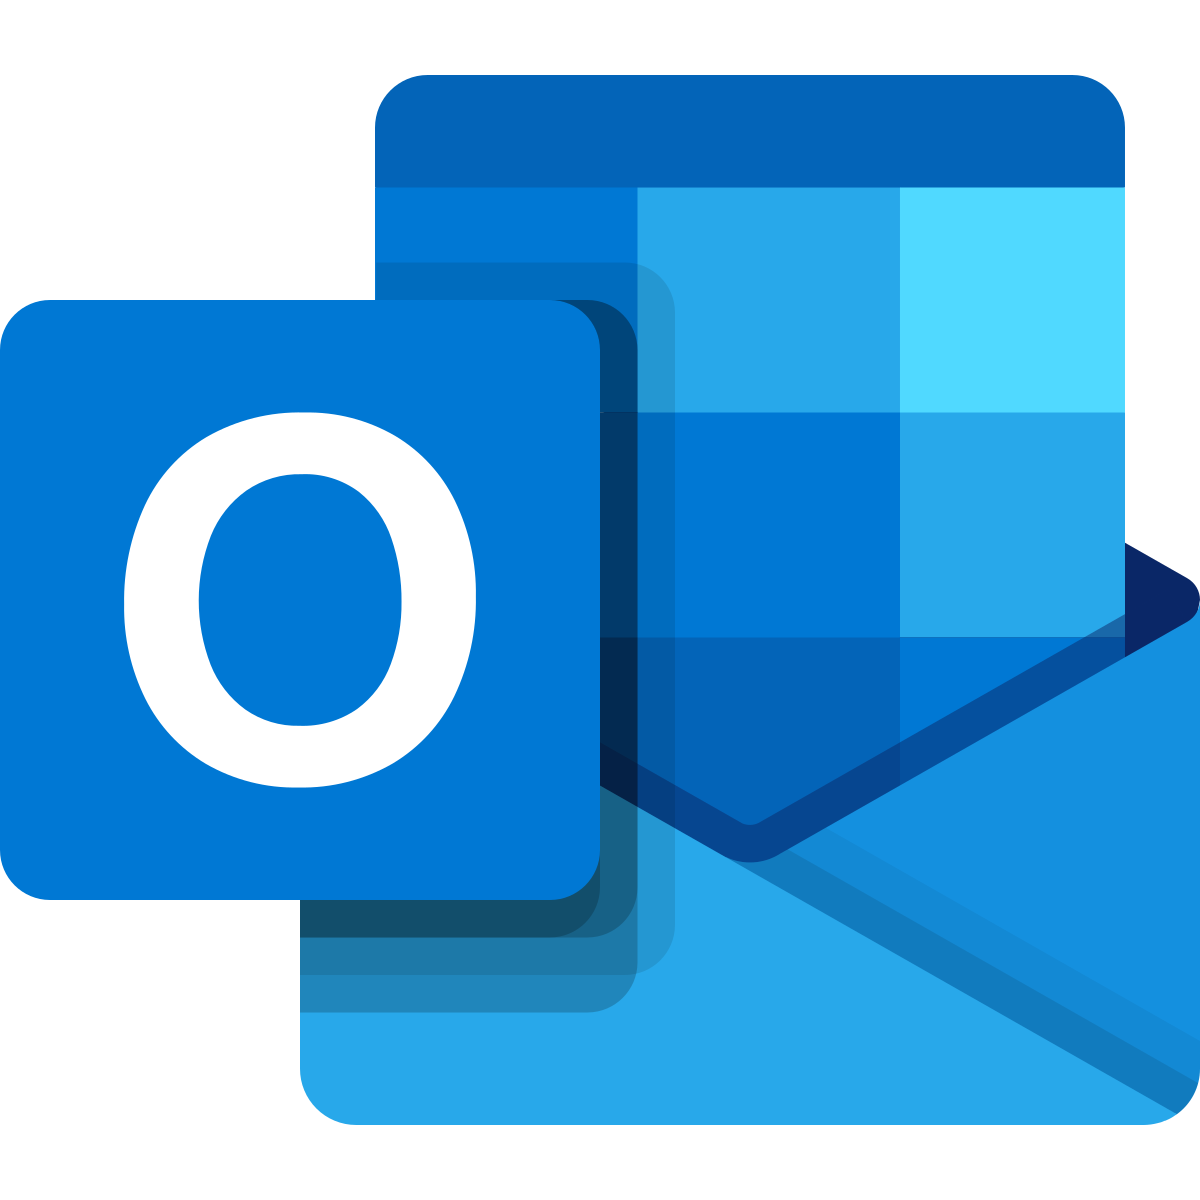 Microsoft Outlook Reviews Ratings, Pros & Cons, Analysis and more